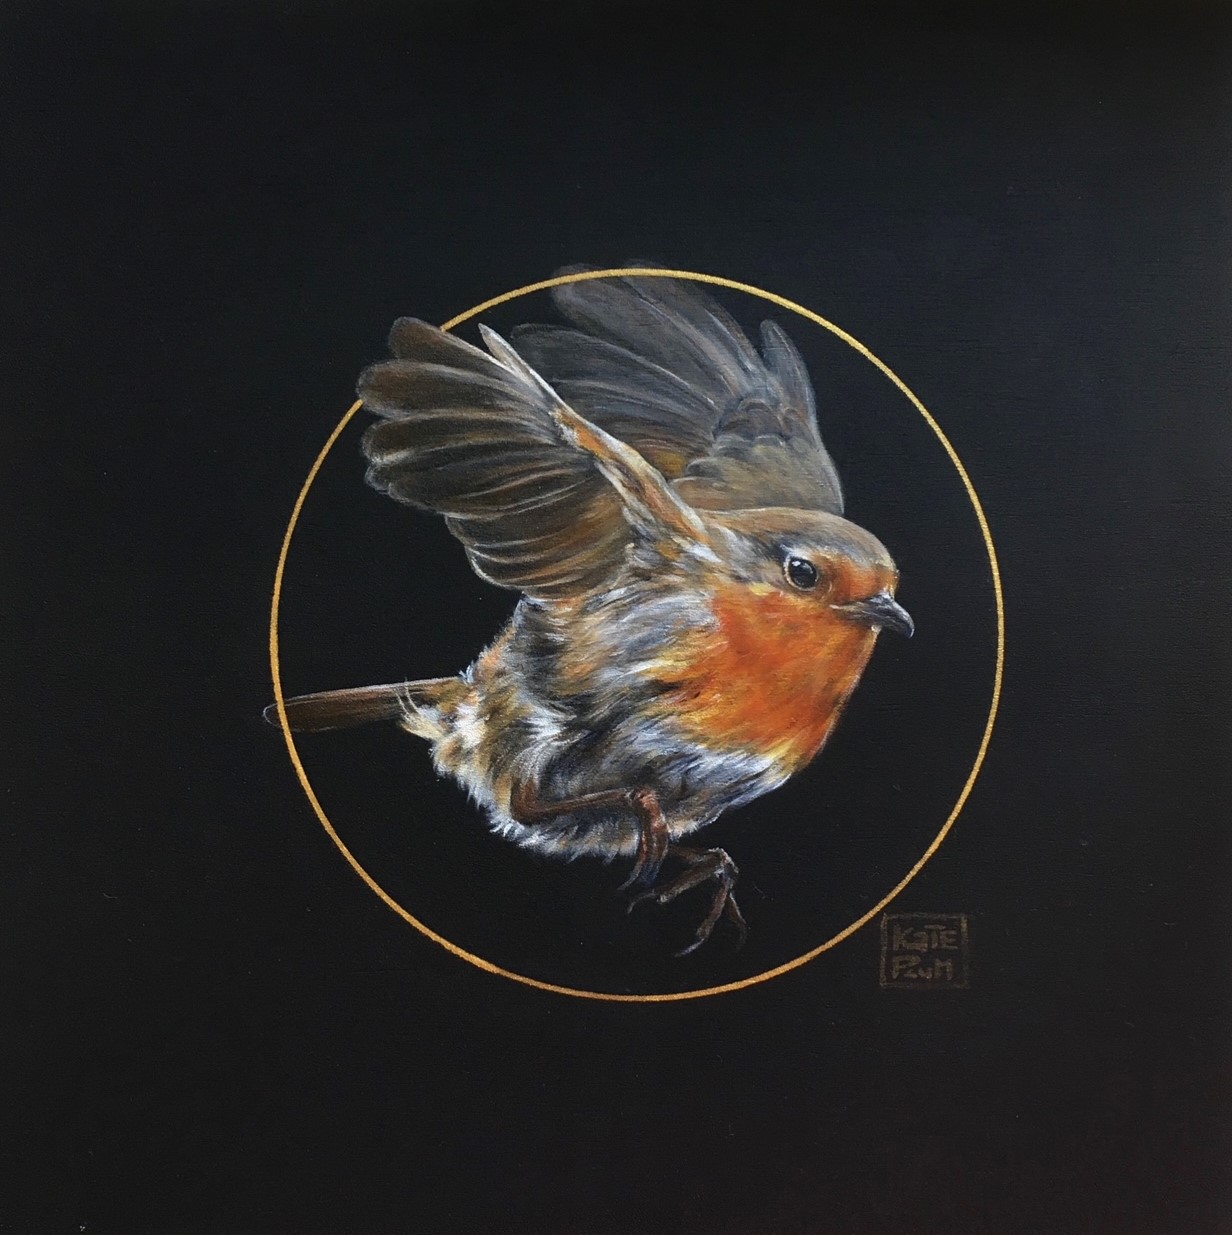 Feathered jewels Robin  by Kate Plum